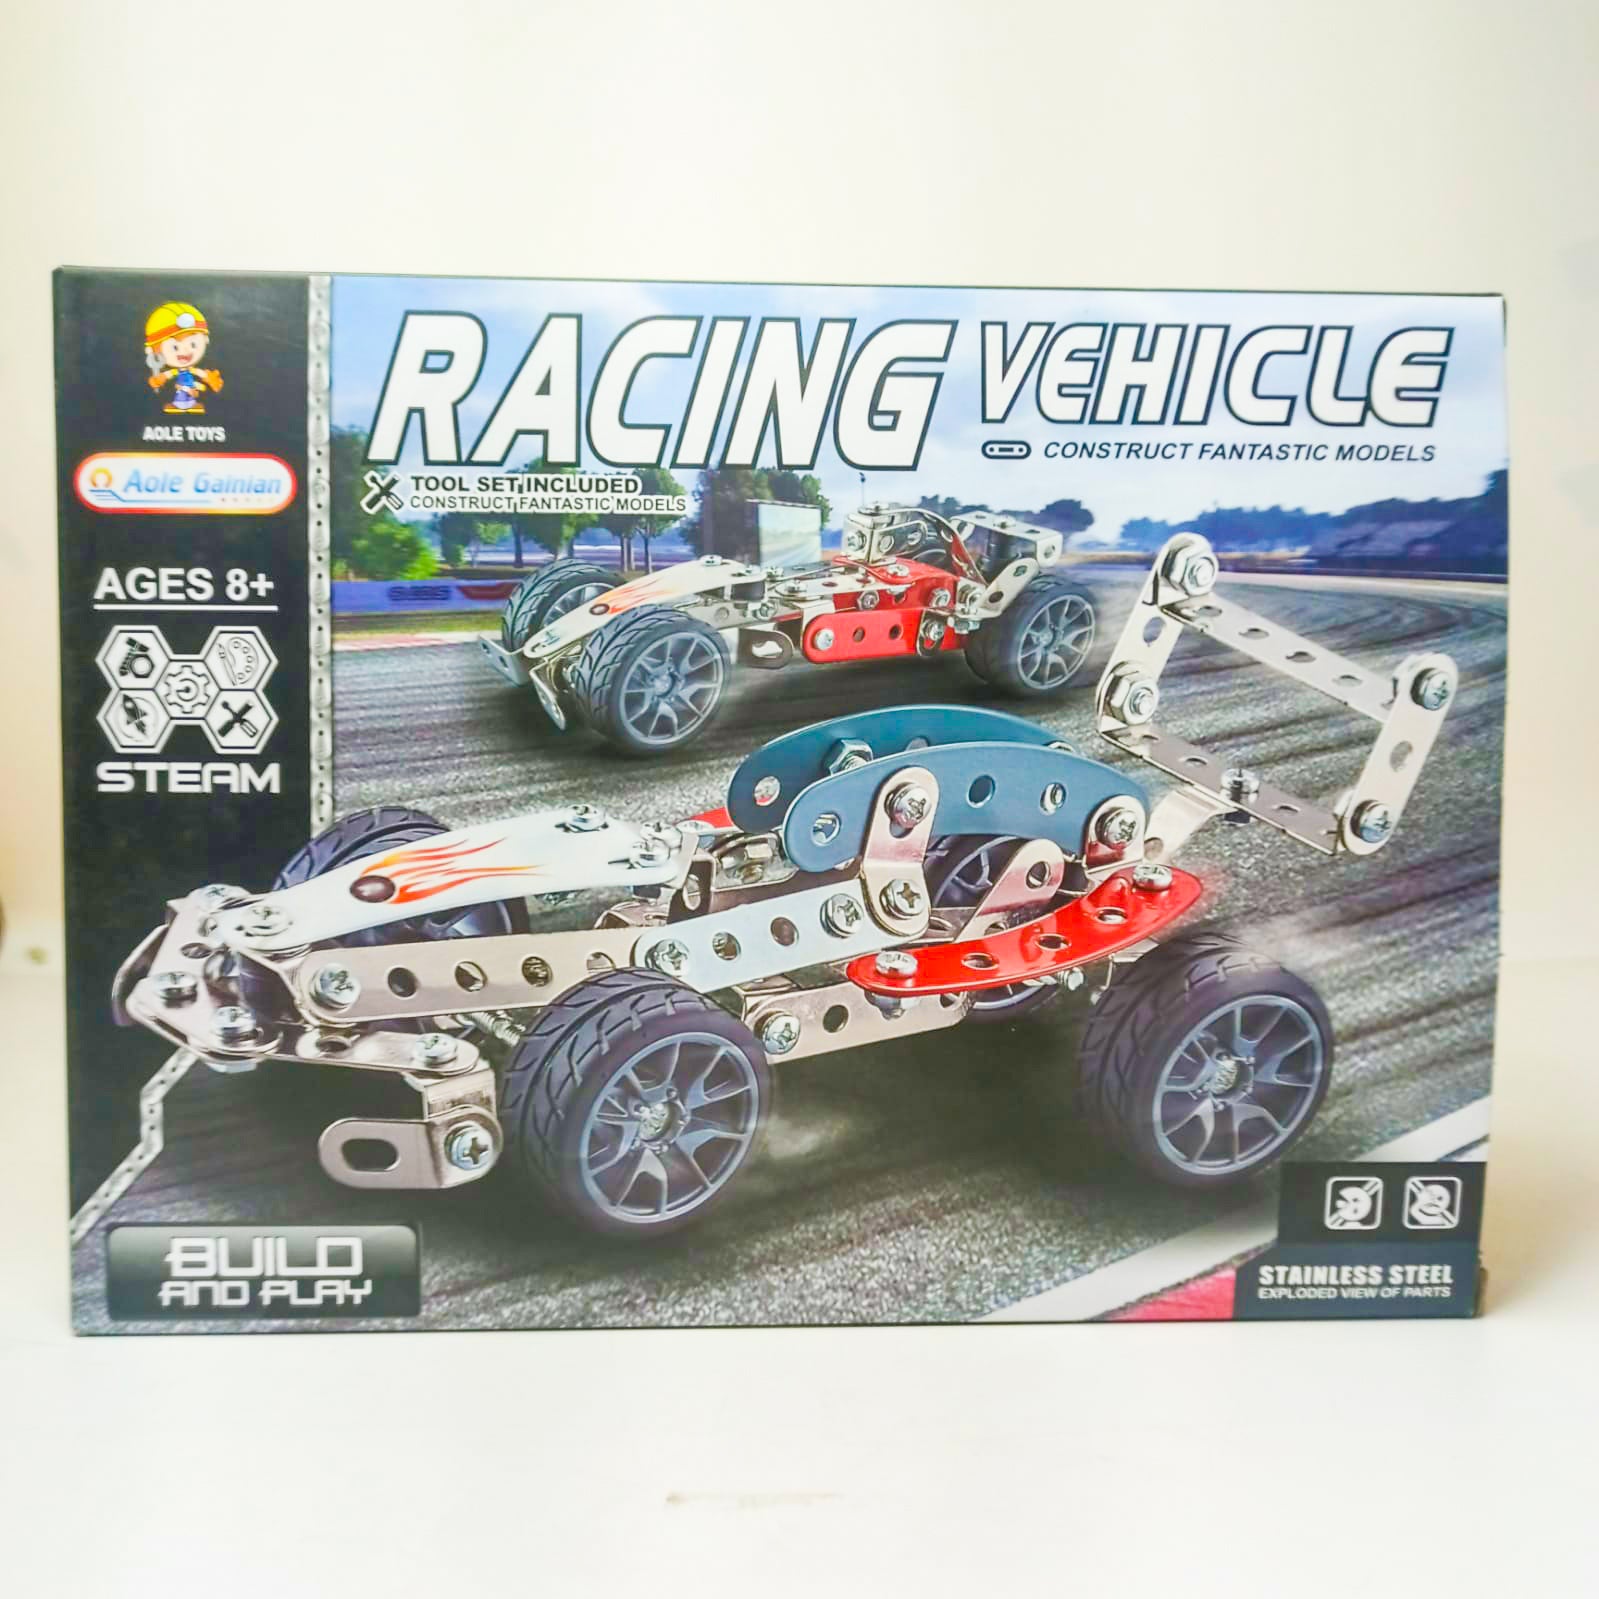 Racing Vehicle Construction Toy Building Blocks For Kids